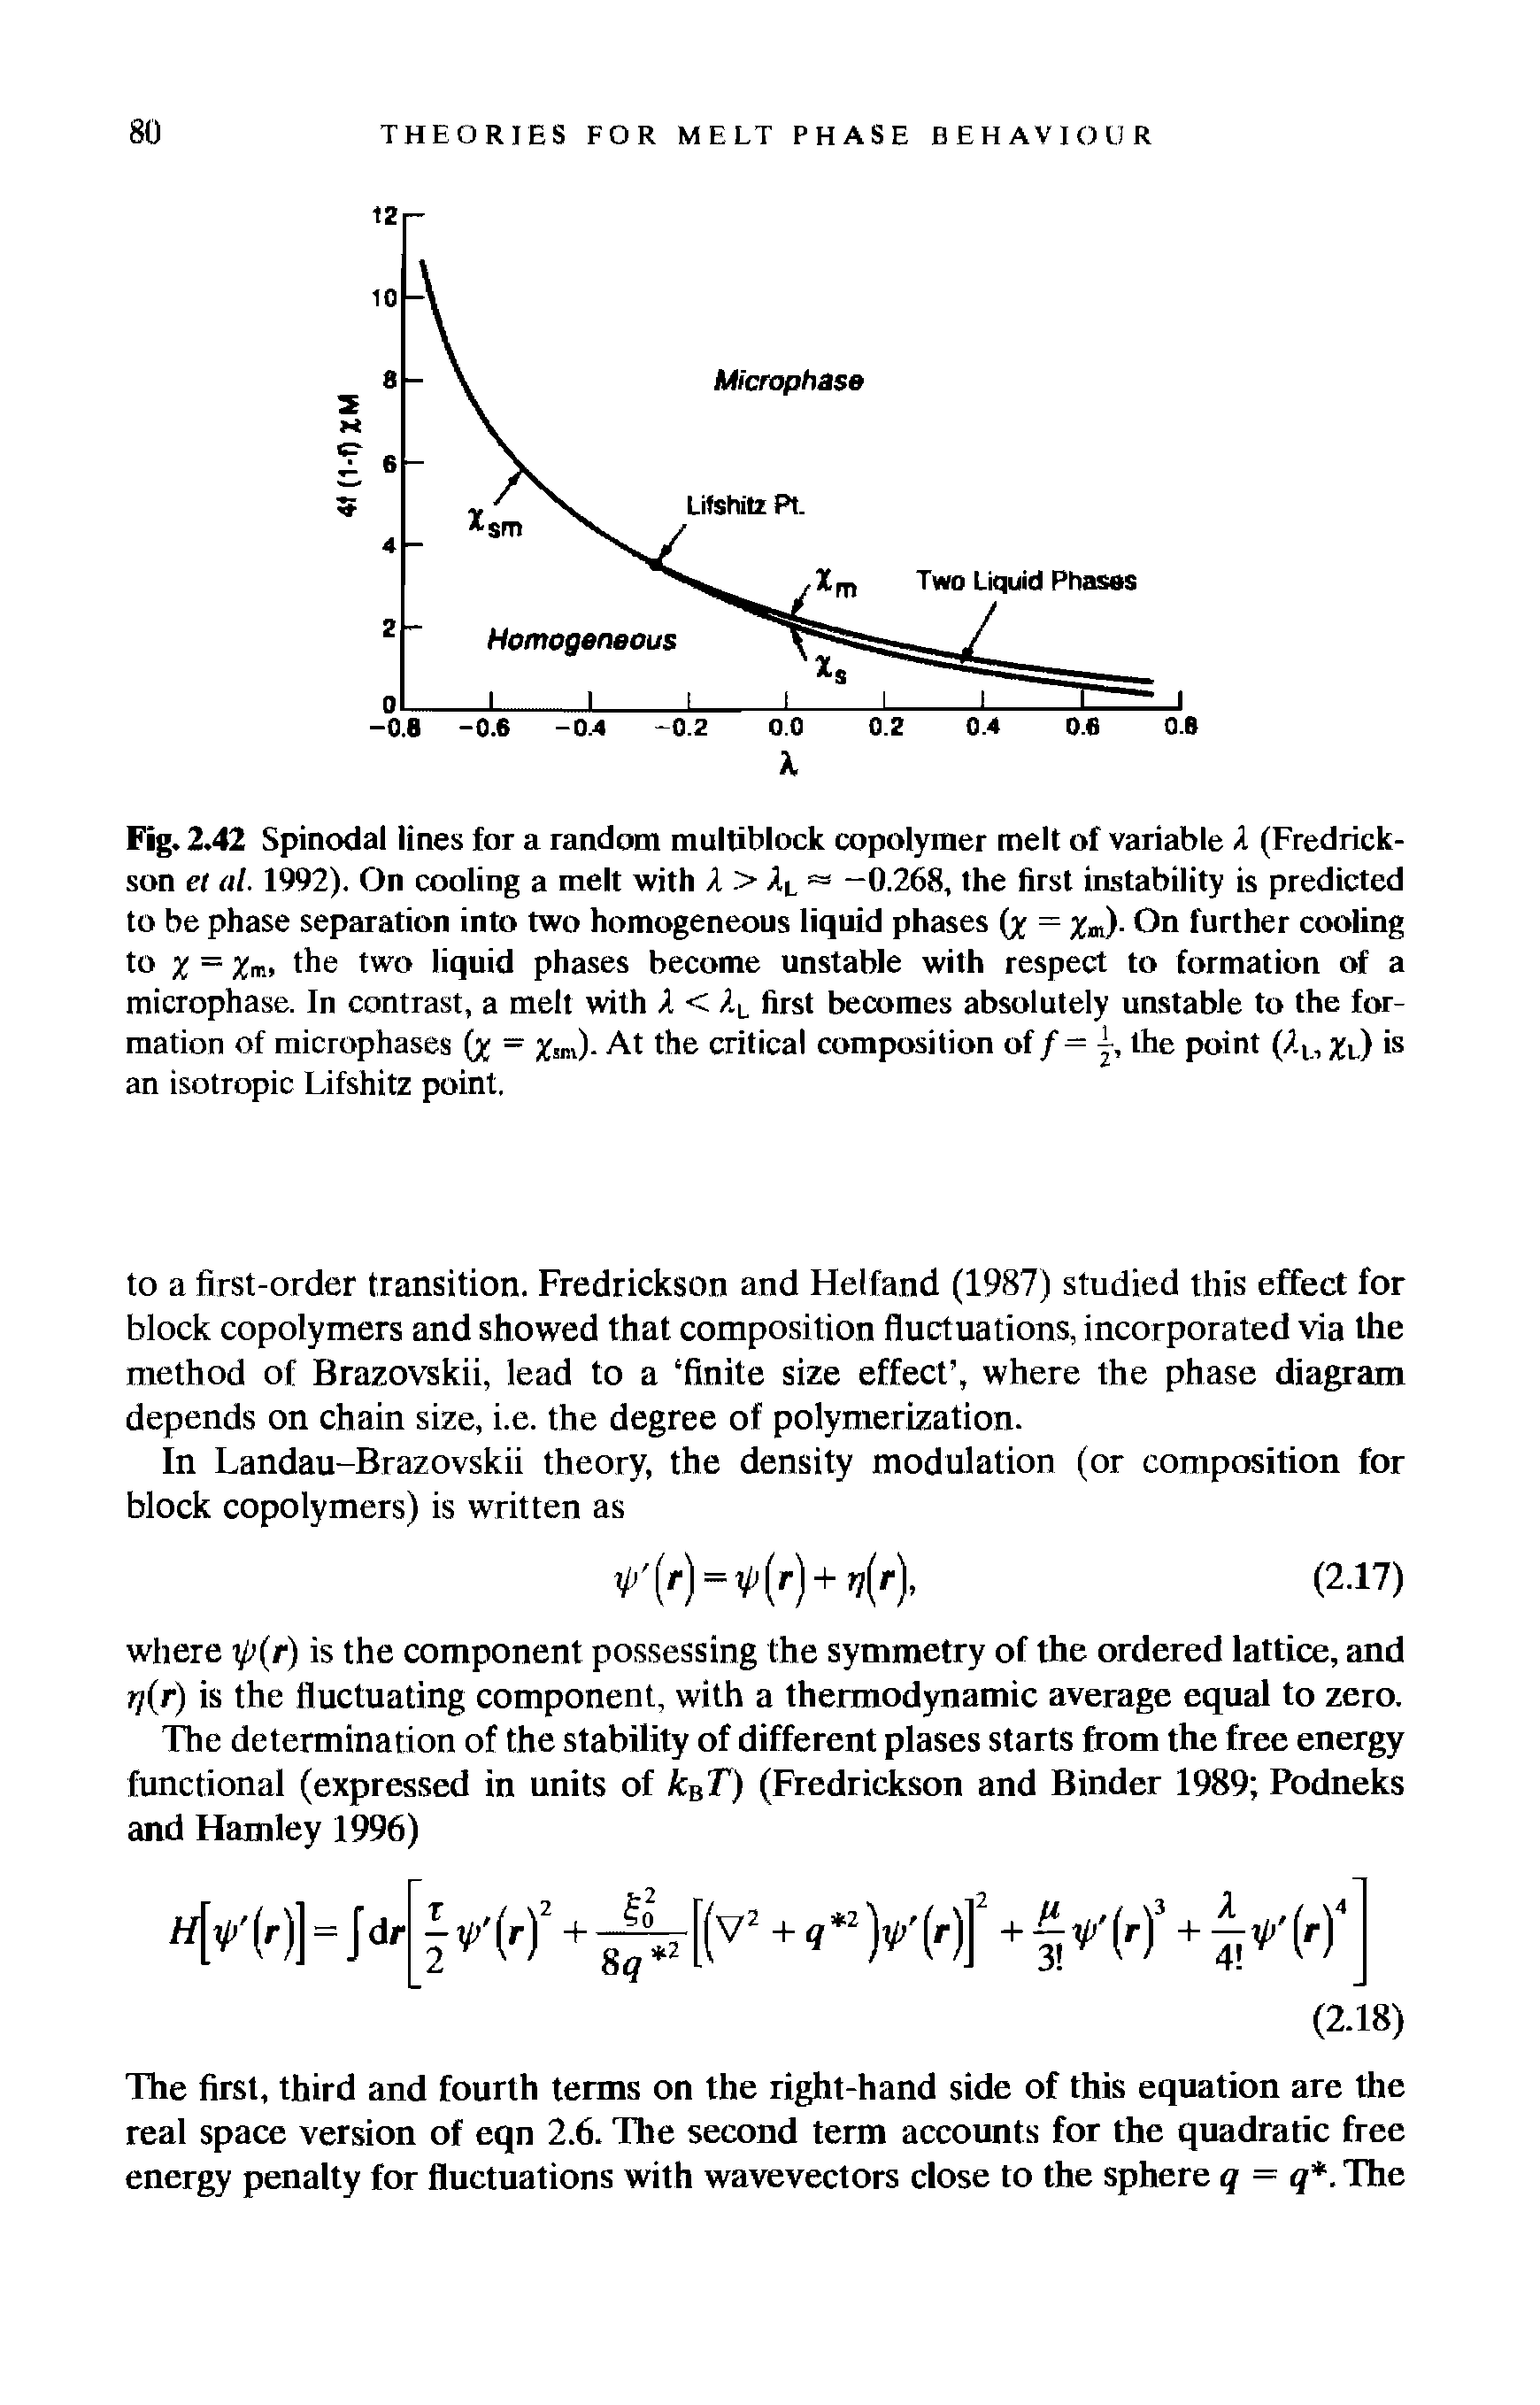 Fig. 2.42 Spinodal lines for a random multiblock copolymer melt of variable X (Fredrickson el al. 1992). On cooling a melt with X > AL —0.268, the first instability is predicted to be phase separation into two homogeneous liquid phases (x = %m)- On further cooling to % = the two liquid phases become unstable with respect to formation of a microphase. In contrast, a melt with X < XL first becomes absolutely unstable to the formation of microphases (x = fom)- At the critical composition of /= j, the point (AL, Xi) is an isotropic Lifshitz point.